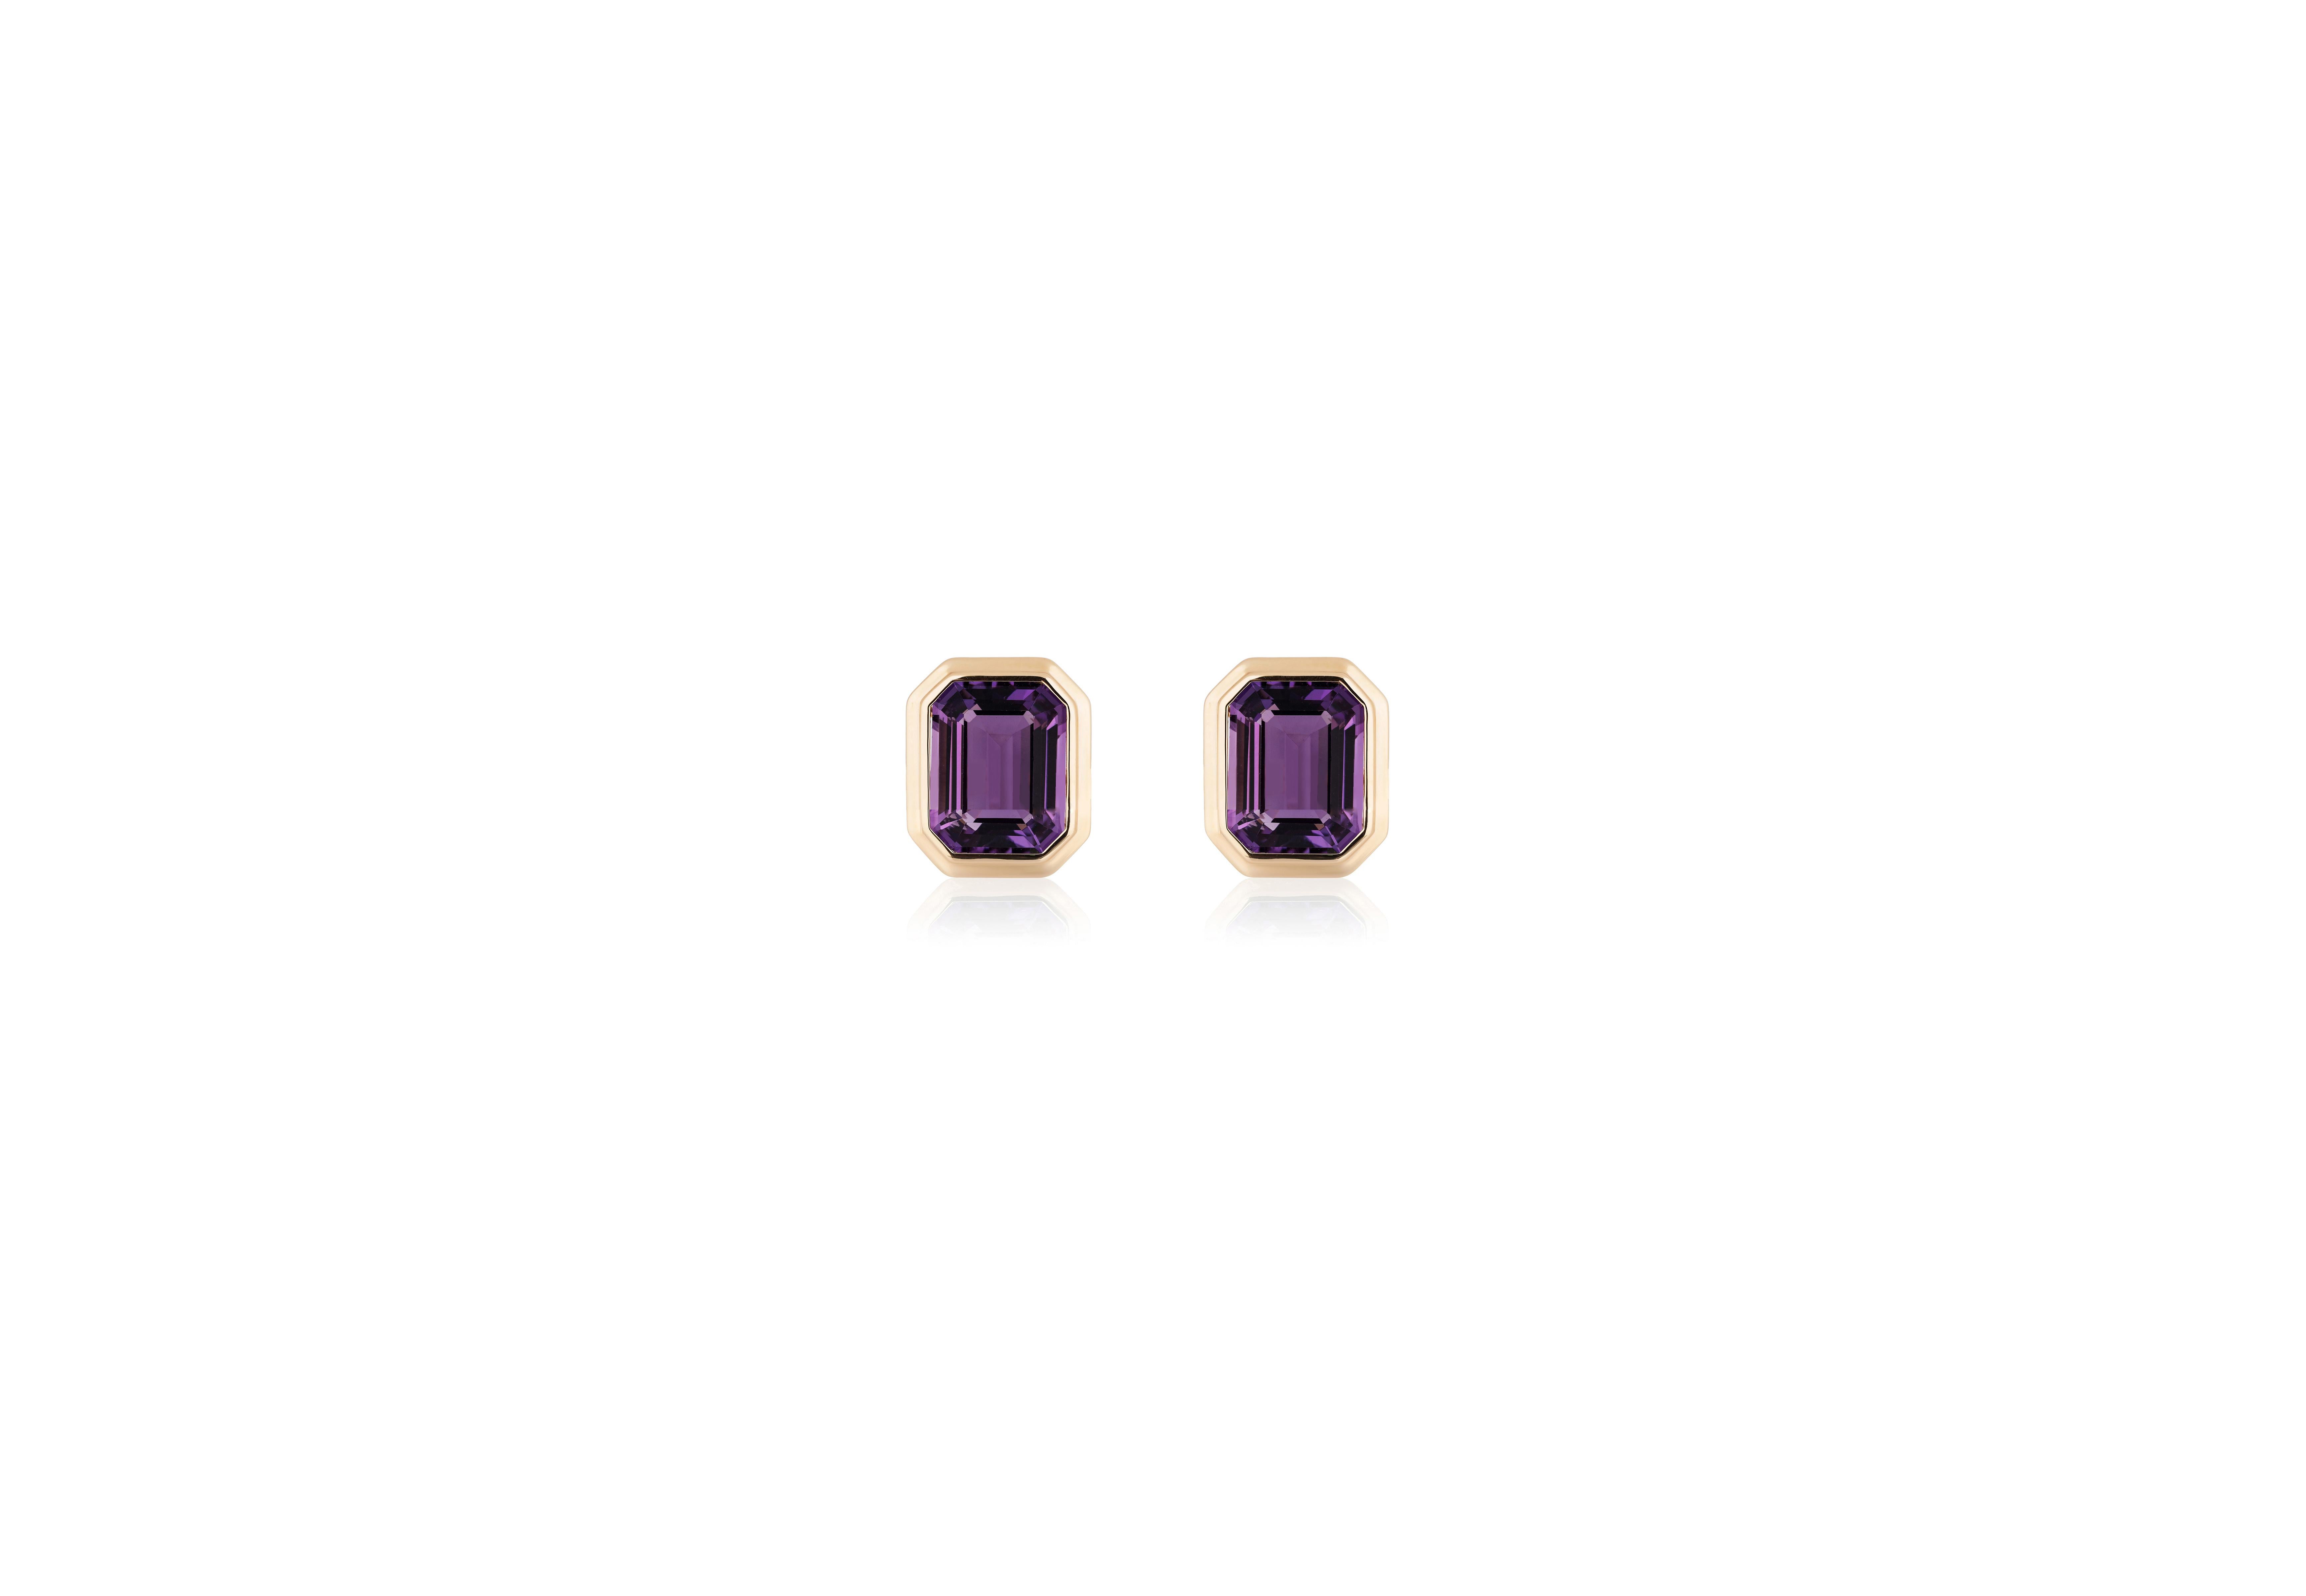 These Amethyst Emerald Cut Bezel Set Stud Earrings in 18K Yellow Gold, part of the exquisite 'Manhattan' Collection, are a stunning embodiment of timeless elegance. These earrings feature rich amethyst gemstones with a striking emerald-cut design,